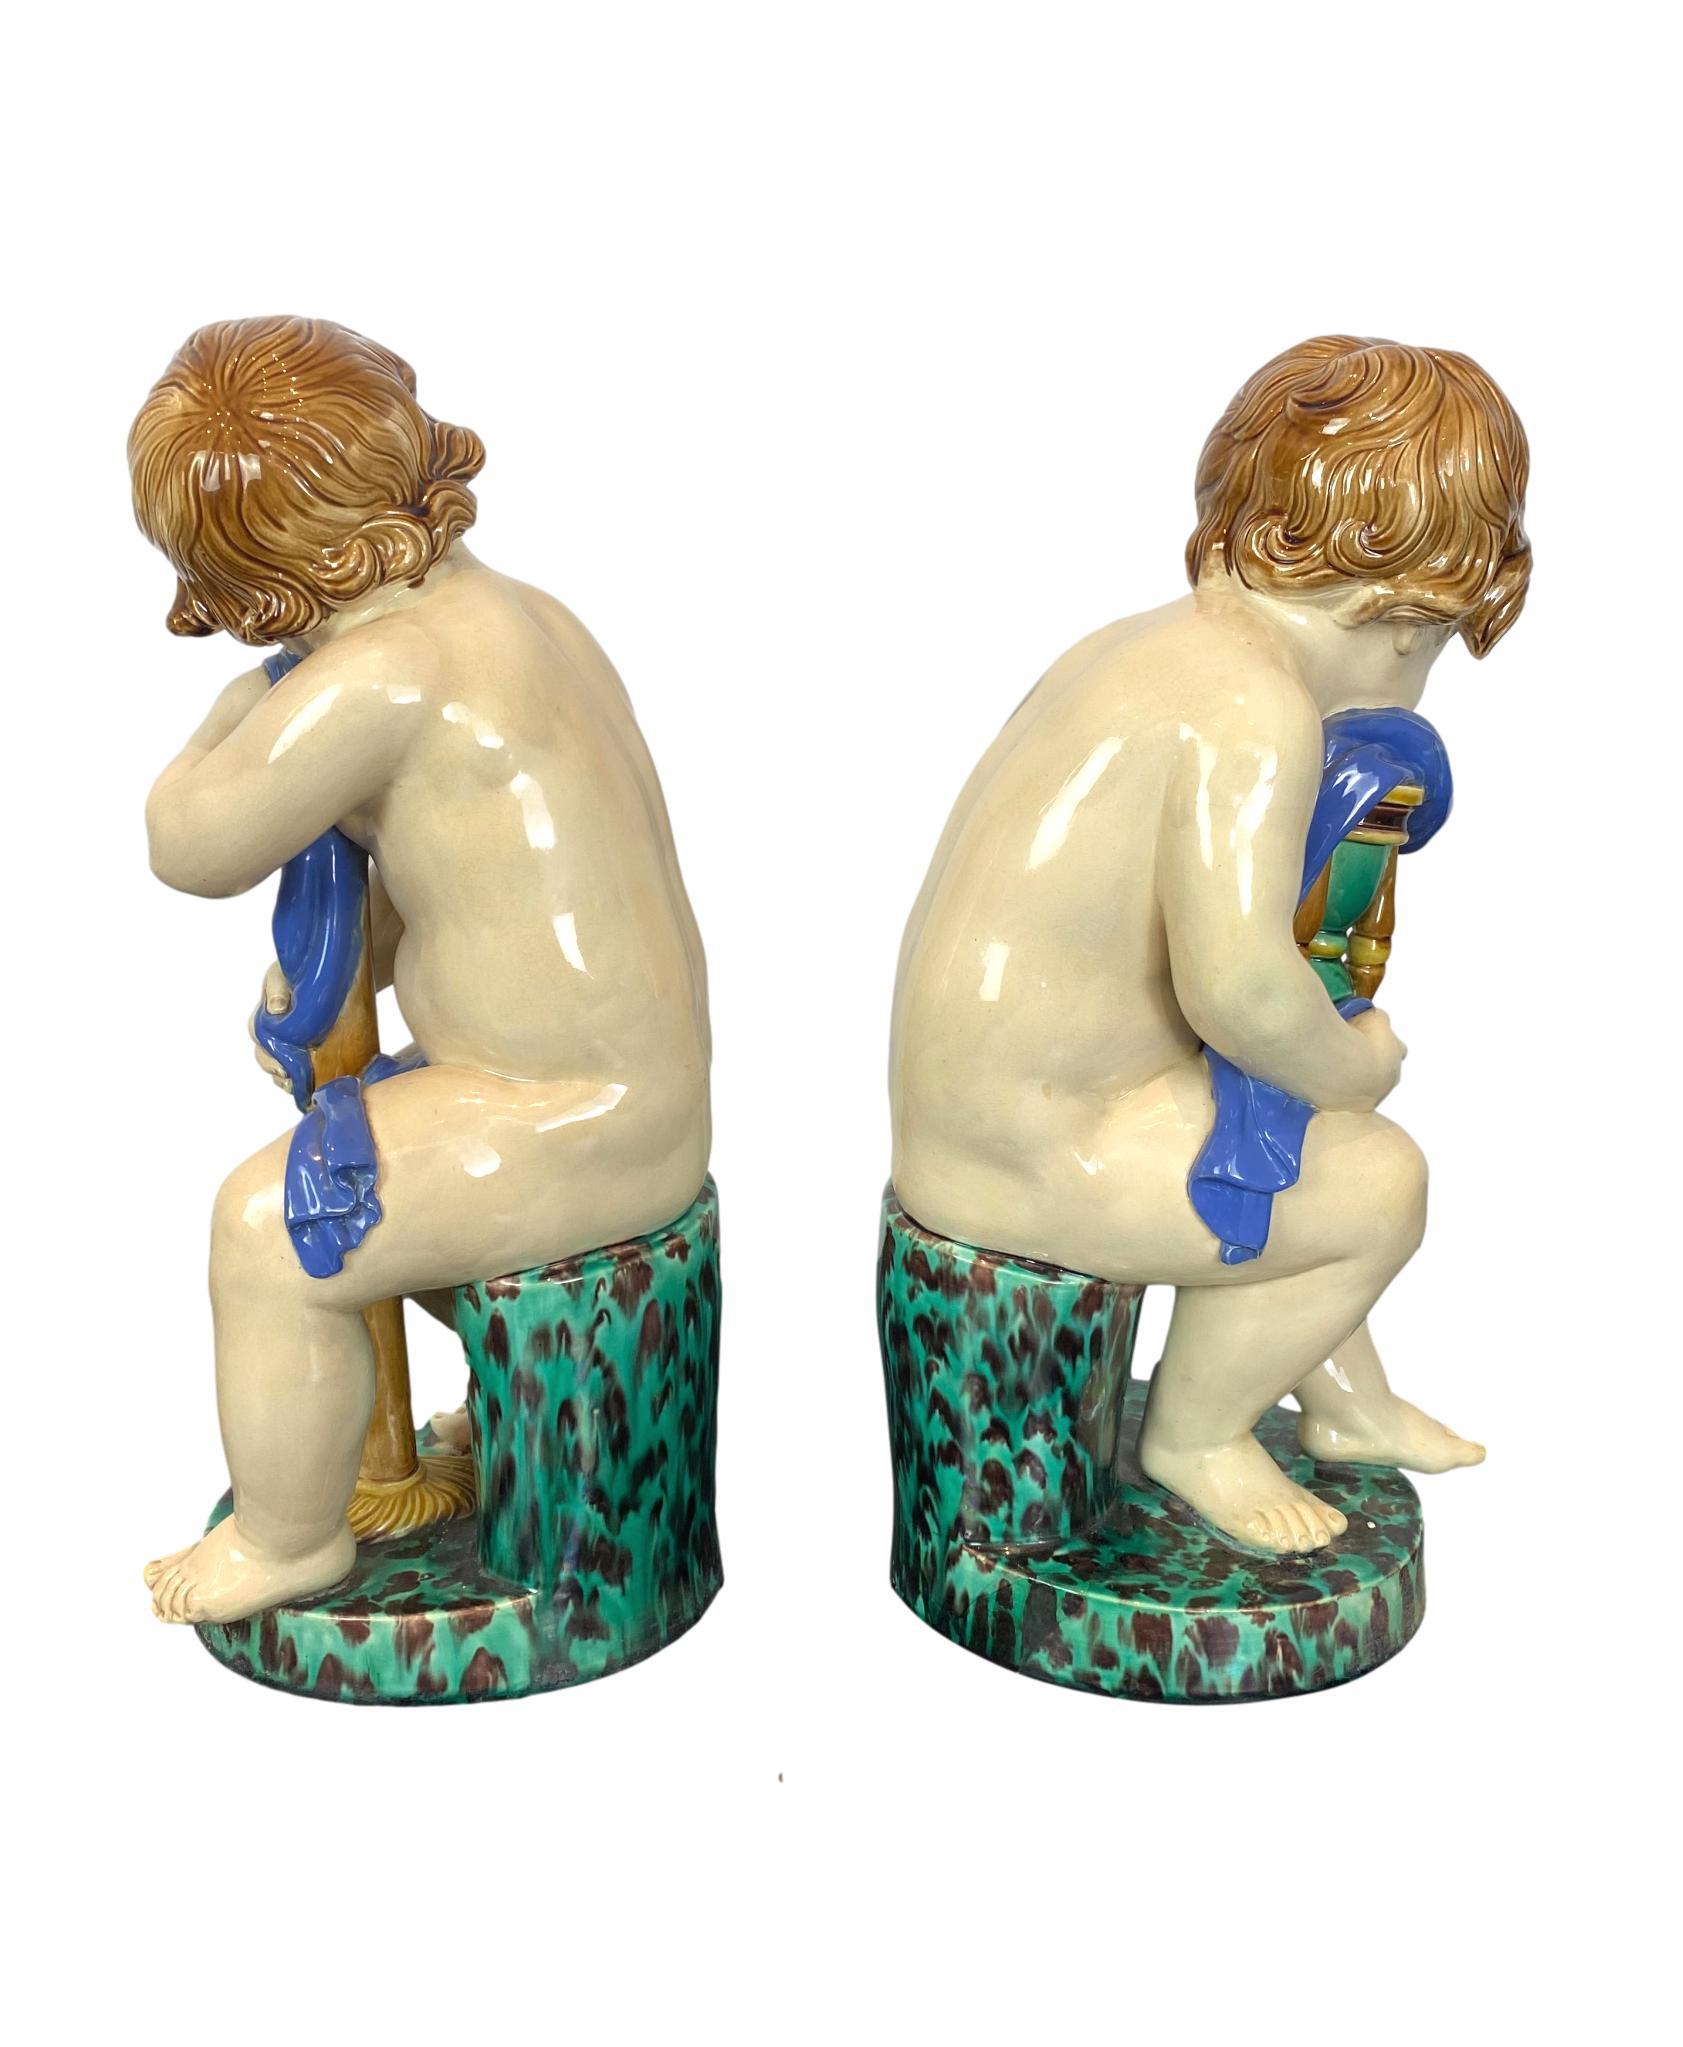 A Pair of Minton Majolica Putti Figures Allegorical of the 'Begining of Time' and 'End of Time,' each seated on a stump and pedestal base glazed in green and brown leopard mottling, one cherub holding an hourglass (Beginning of Time) and the other a